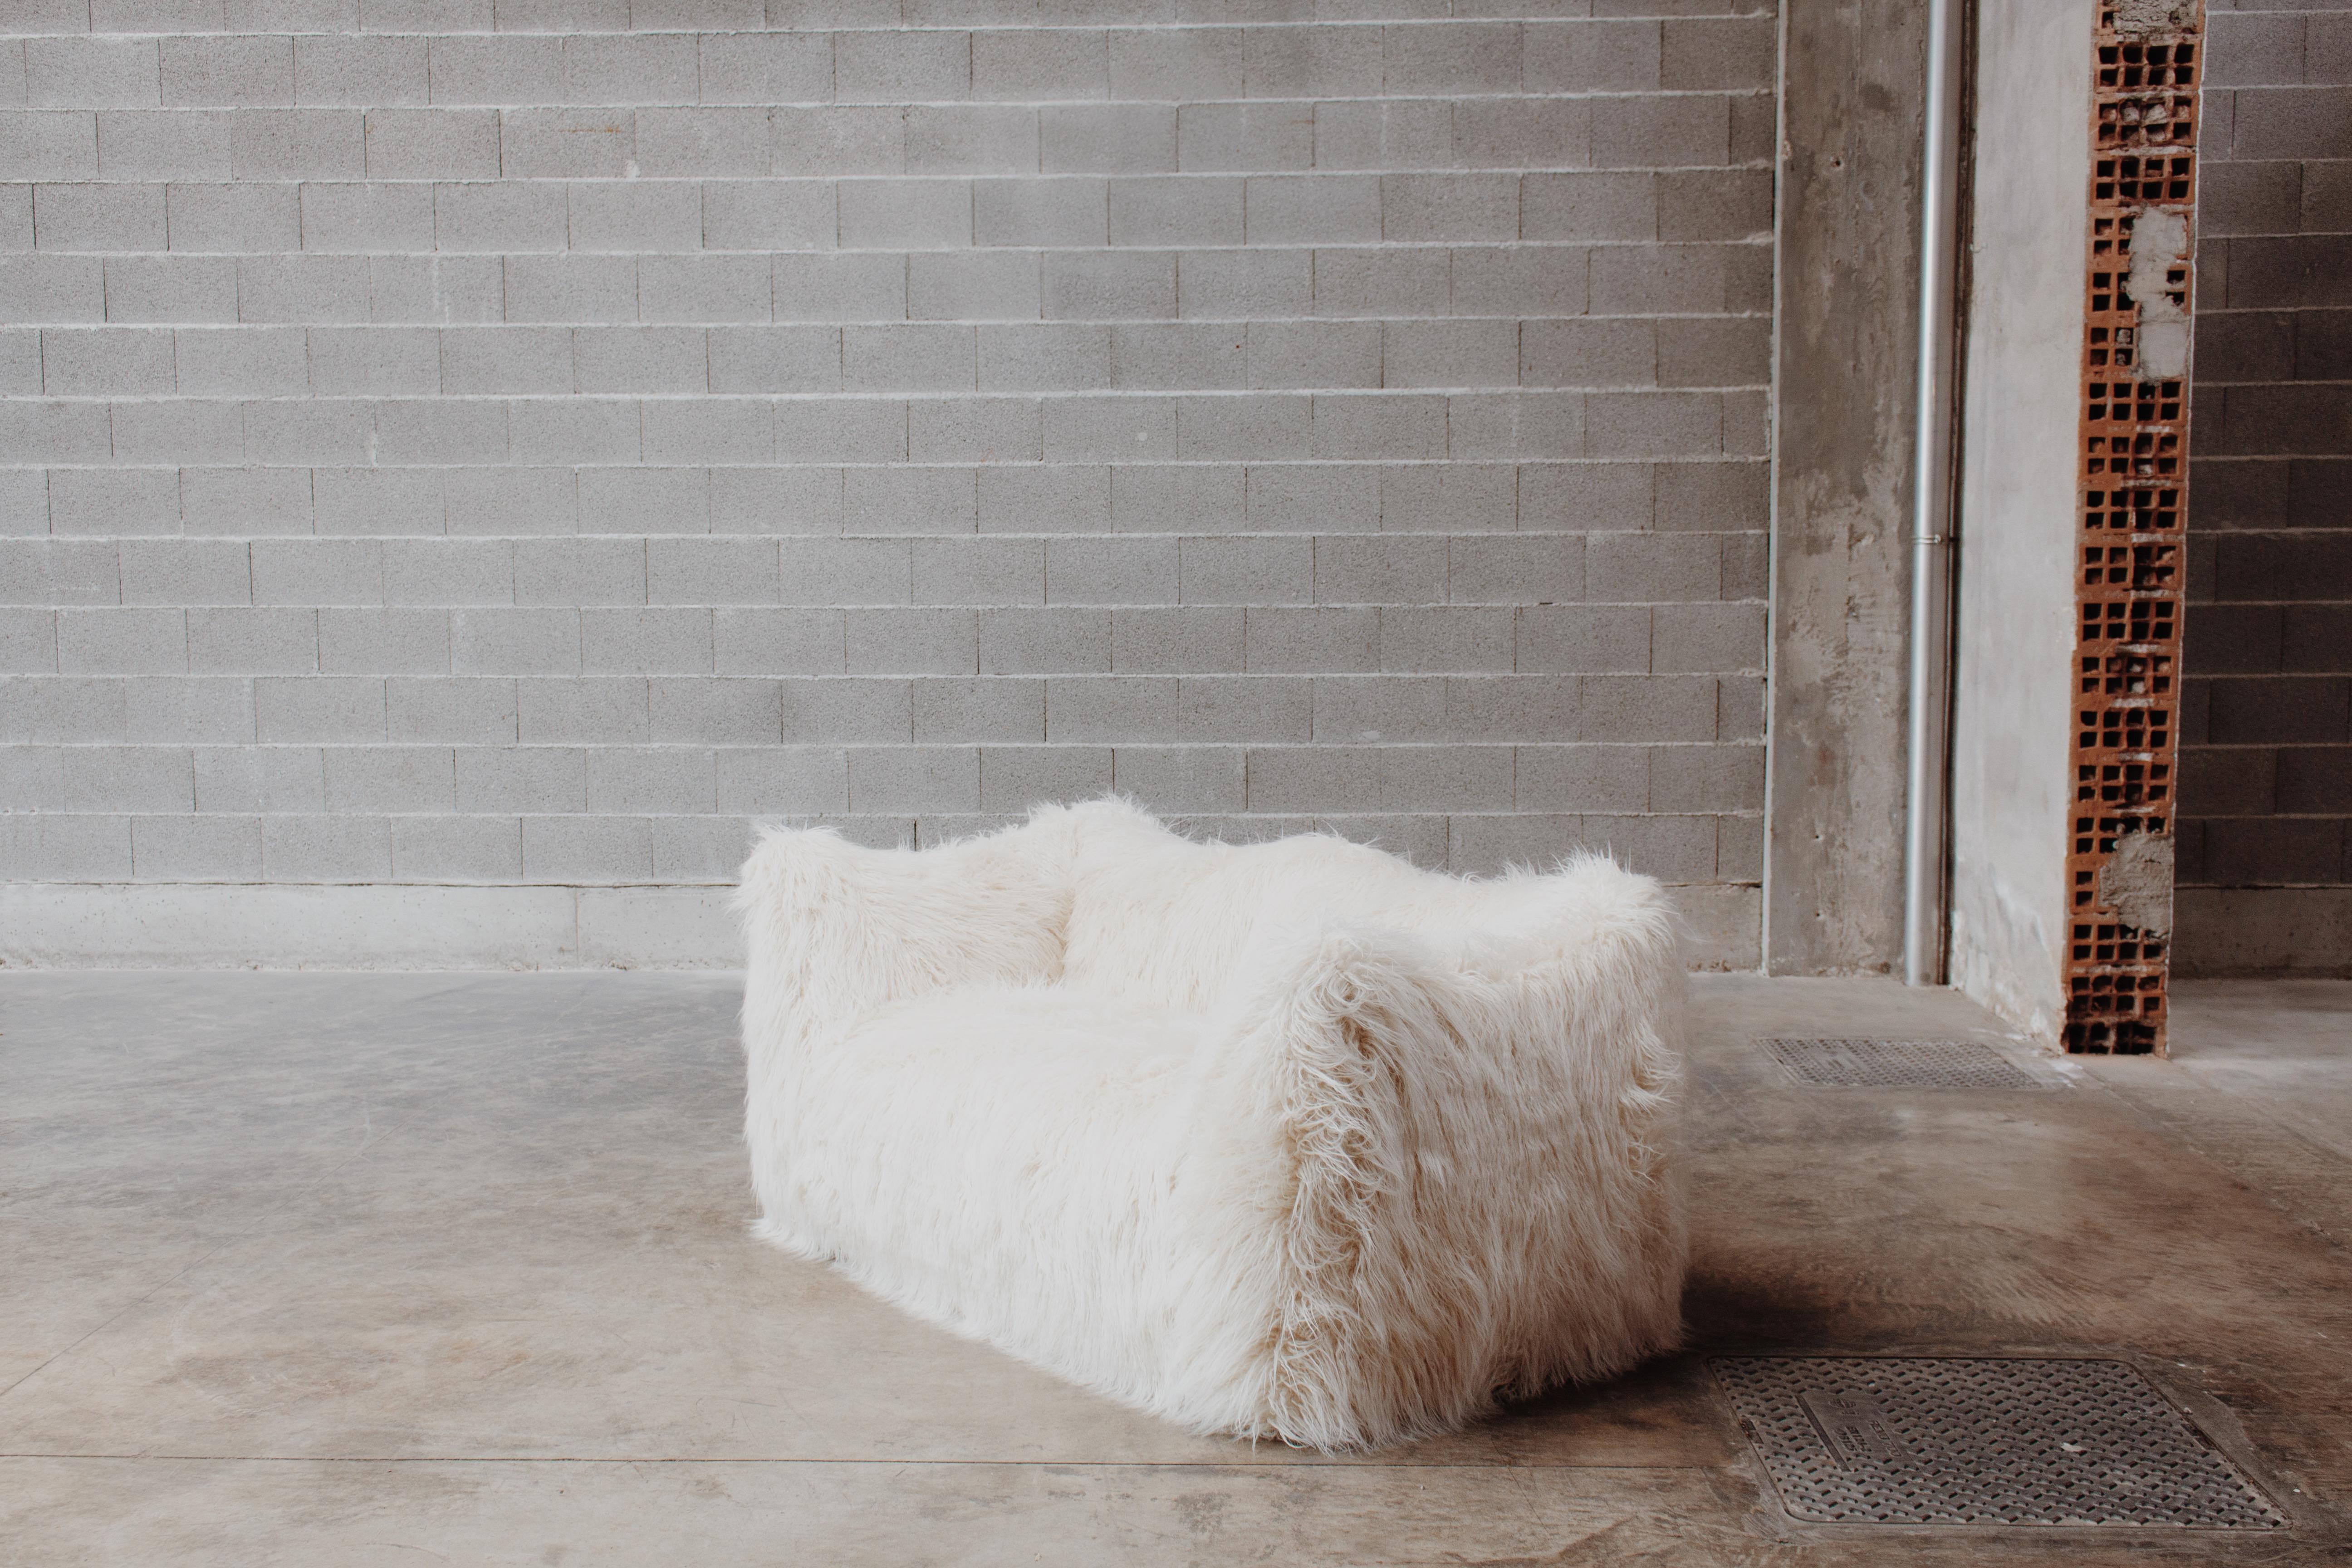 Mario Bellini “Le Bambole” two-seater sofa for B&B Italia, Mongolian faux-fur, Italy, 1971.

This is a timeless Postmodern design icon. The starting point was a shopping bag containing formless material shaped when the bag was set on the ground and